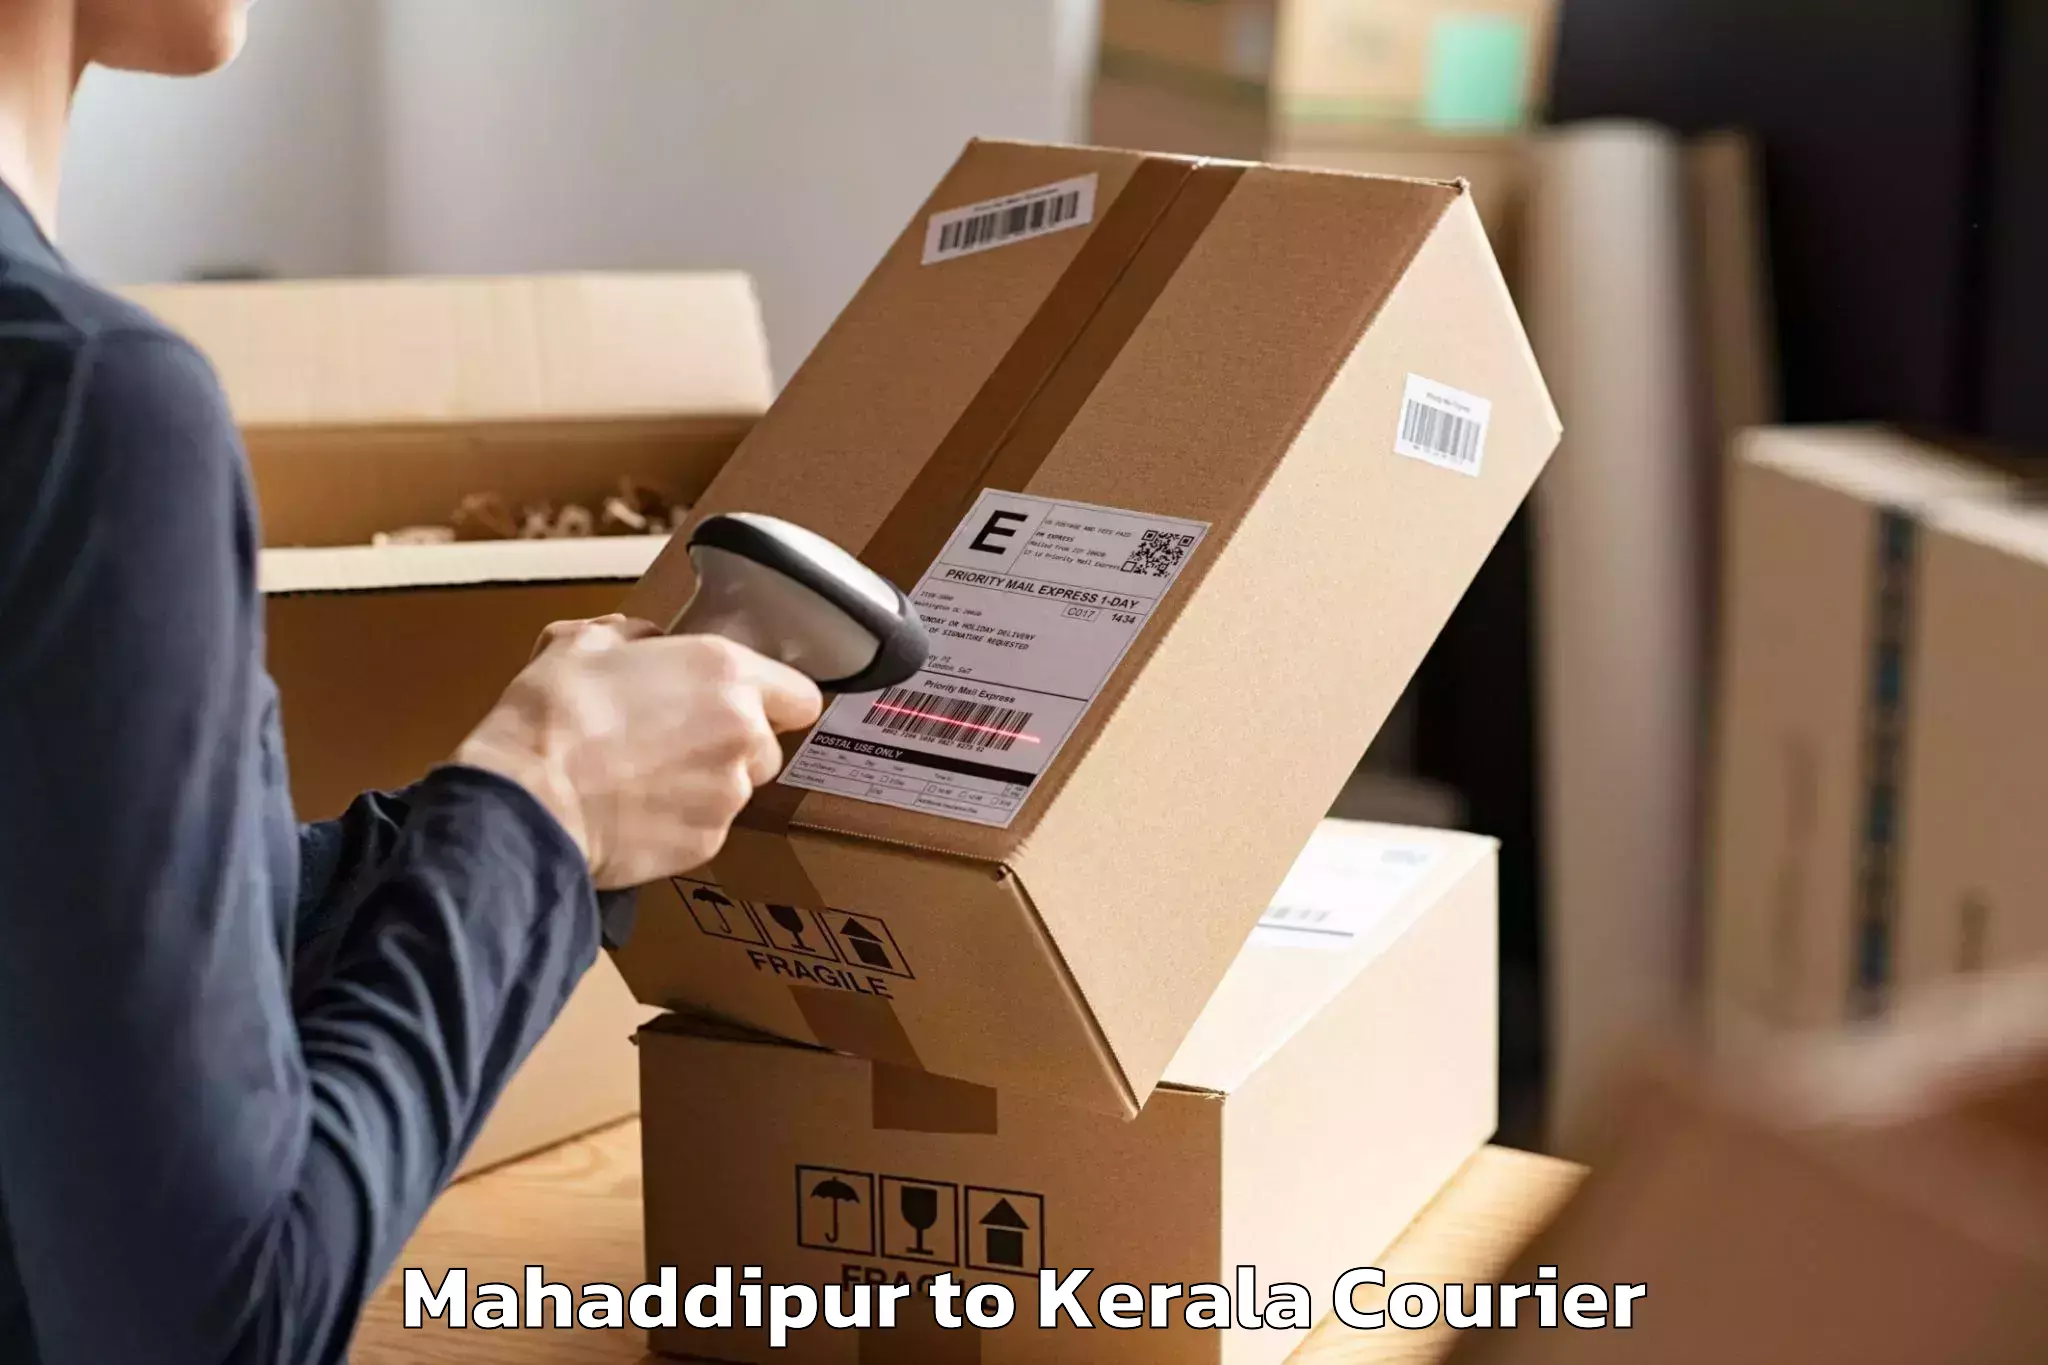 Professional furniture moving in Mahaddipur to Cochin University of Science and Technology